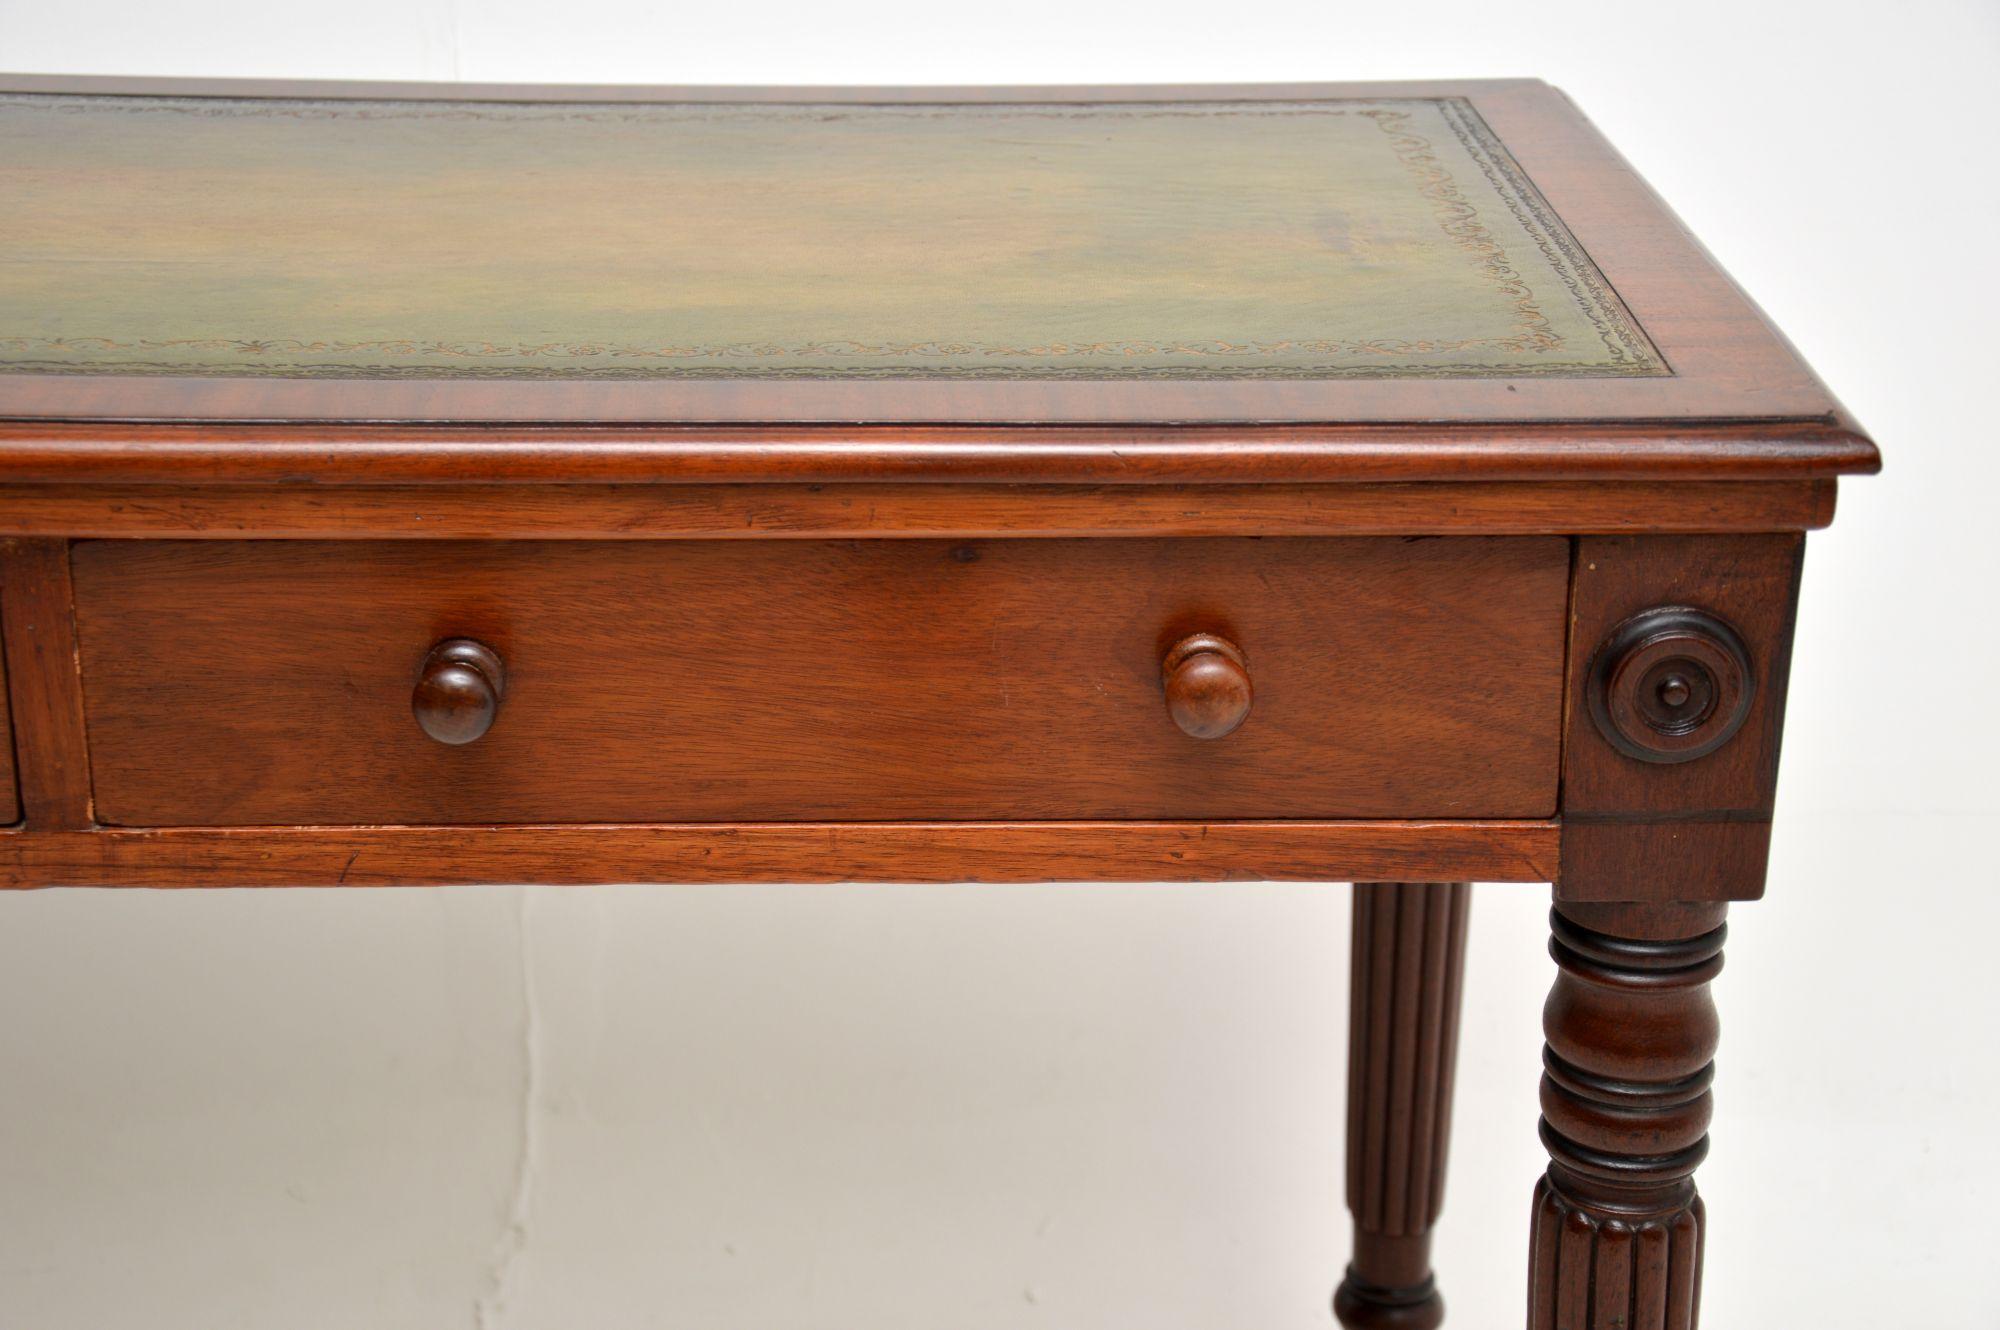 19th Century Antique Victorian Writing Table / Desk